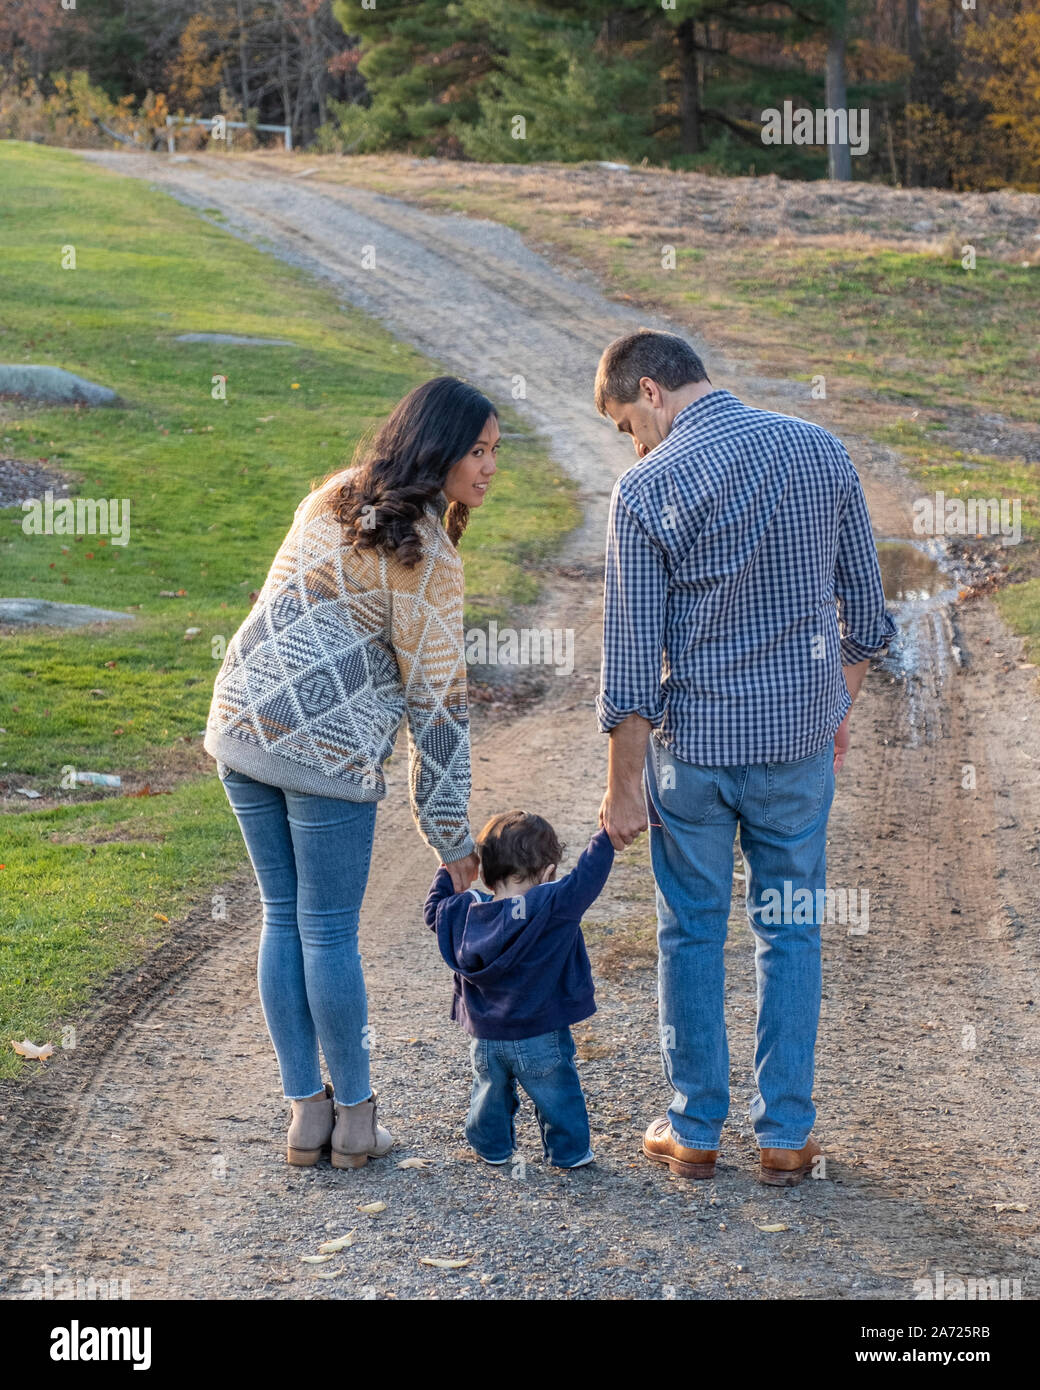 A family walking on a dirt road in the fall Stock Photo